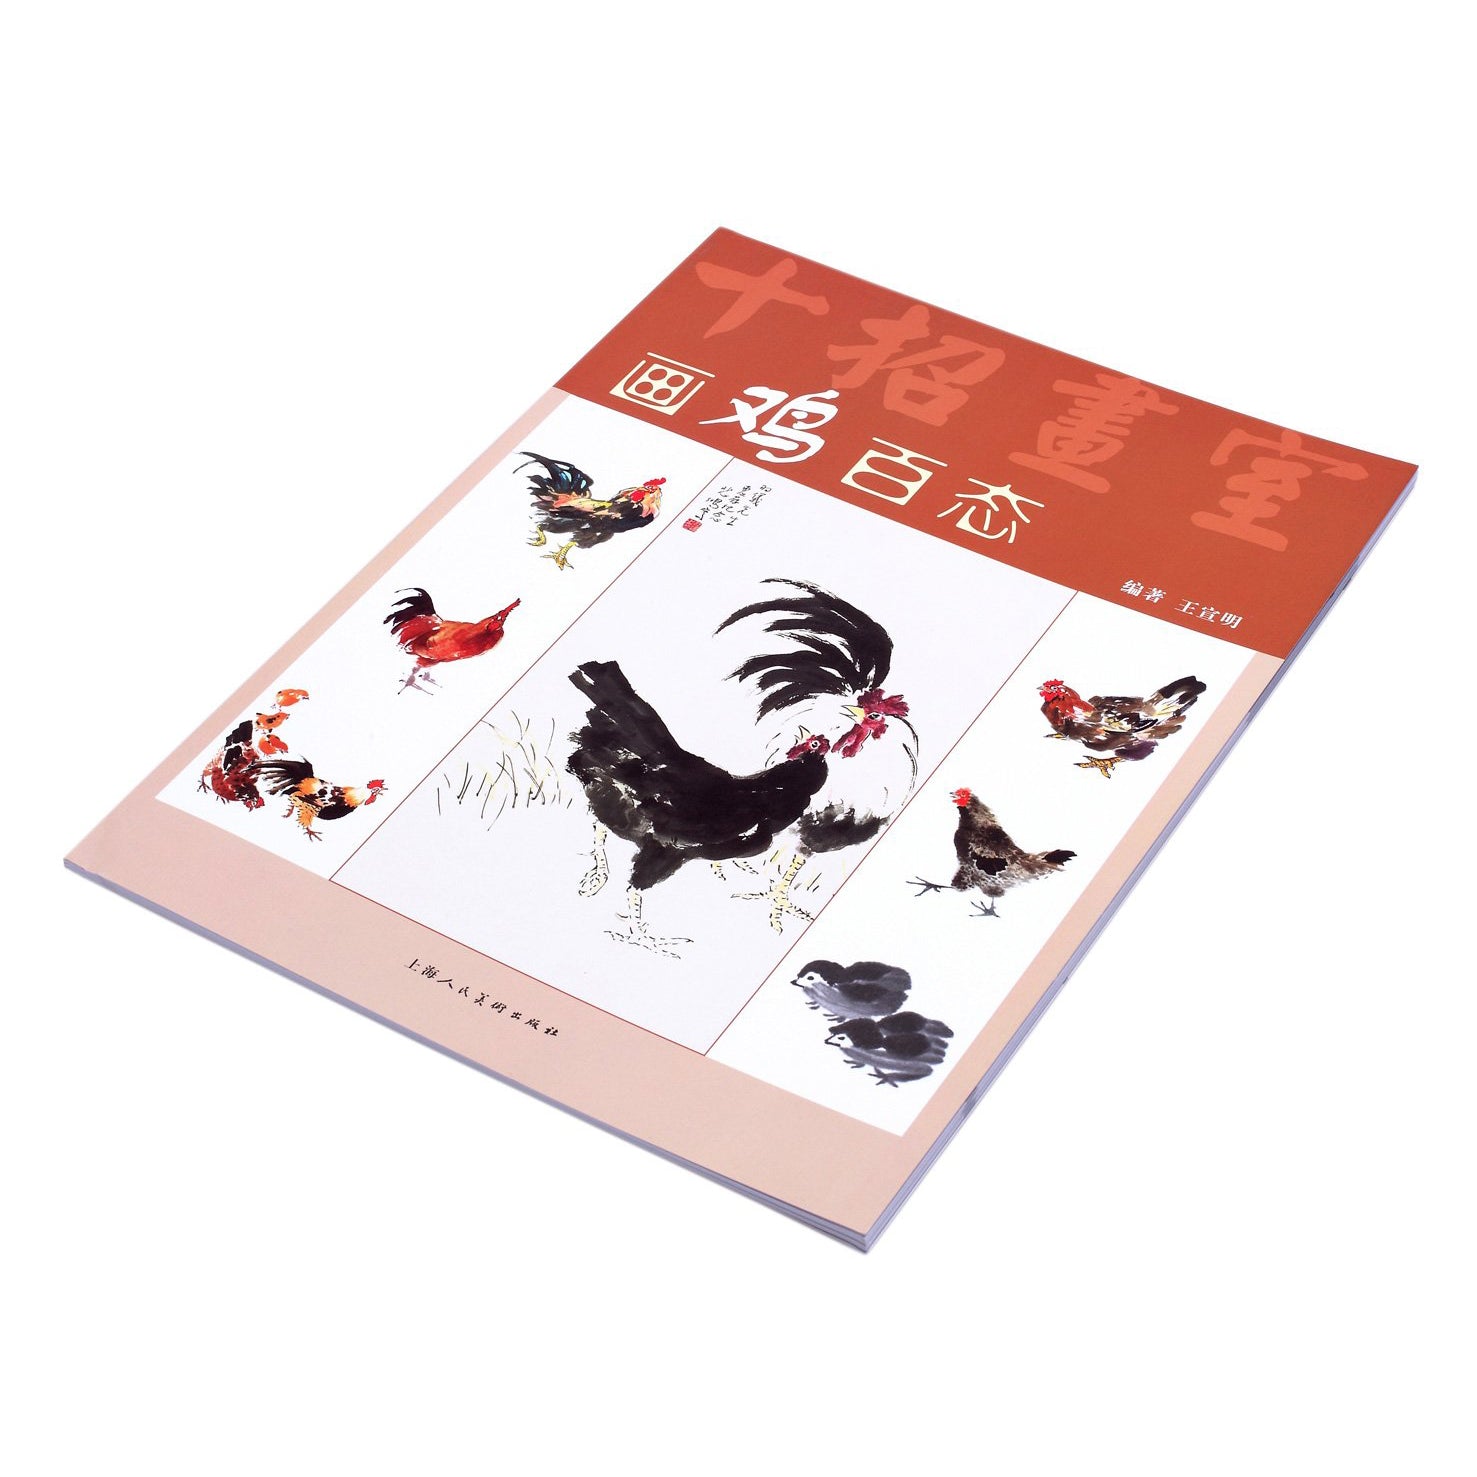 ten tricks in chinese painting is a book series with easy and understandable tricks for beginners to learn sumi chinese brush painting